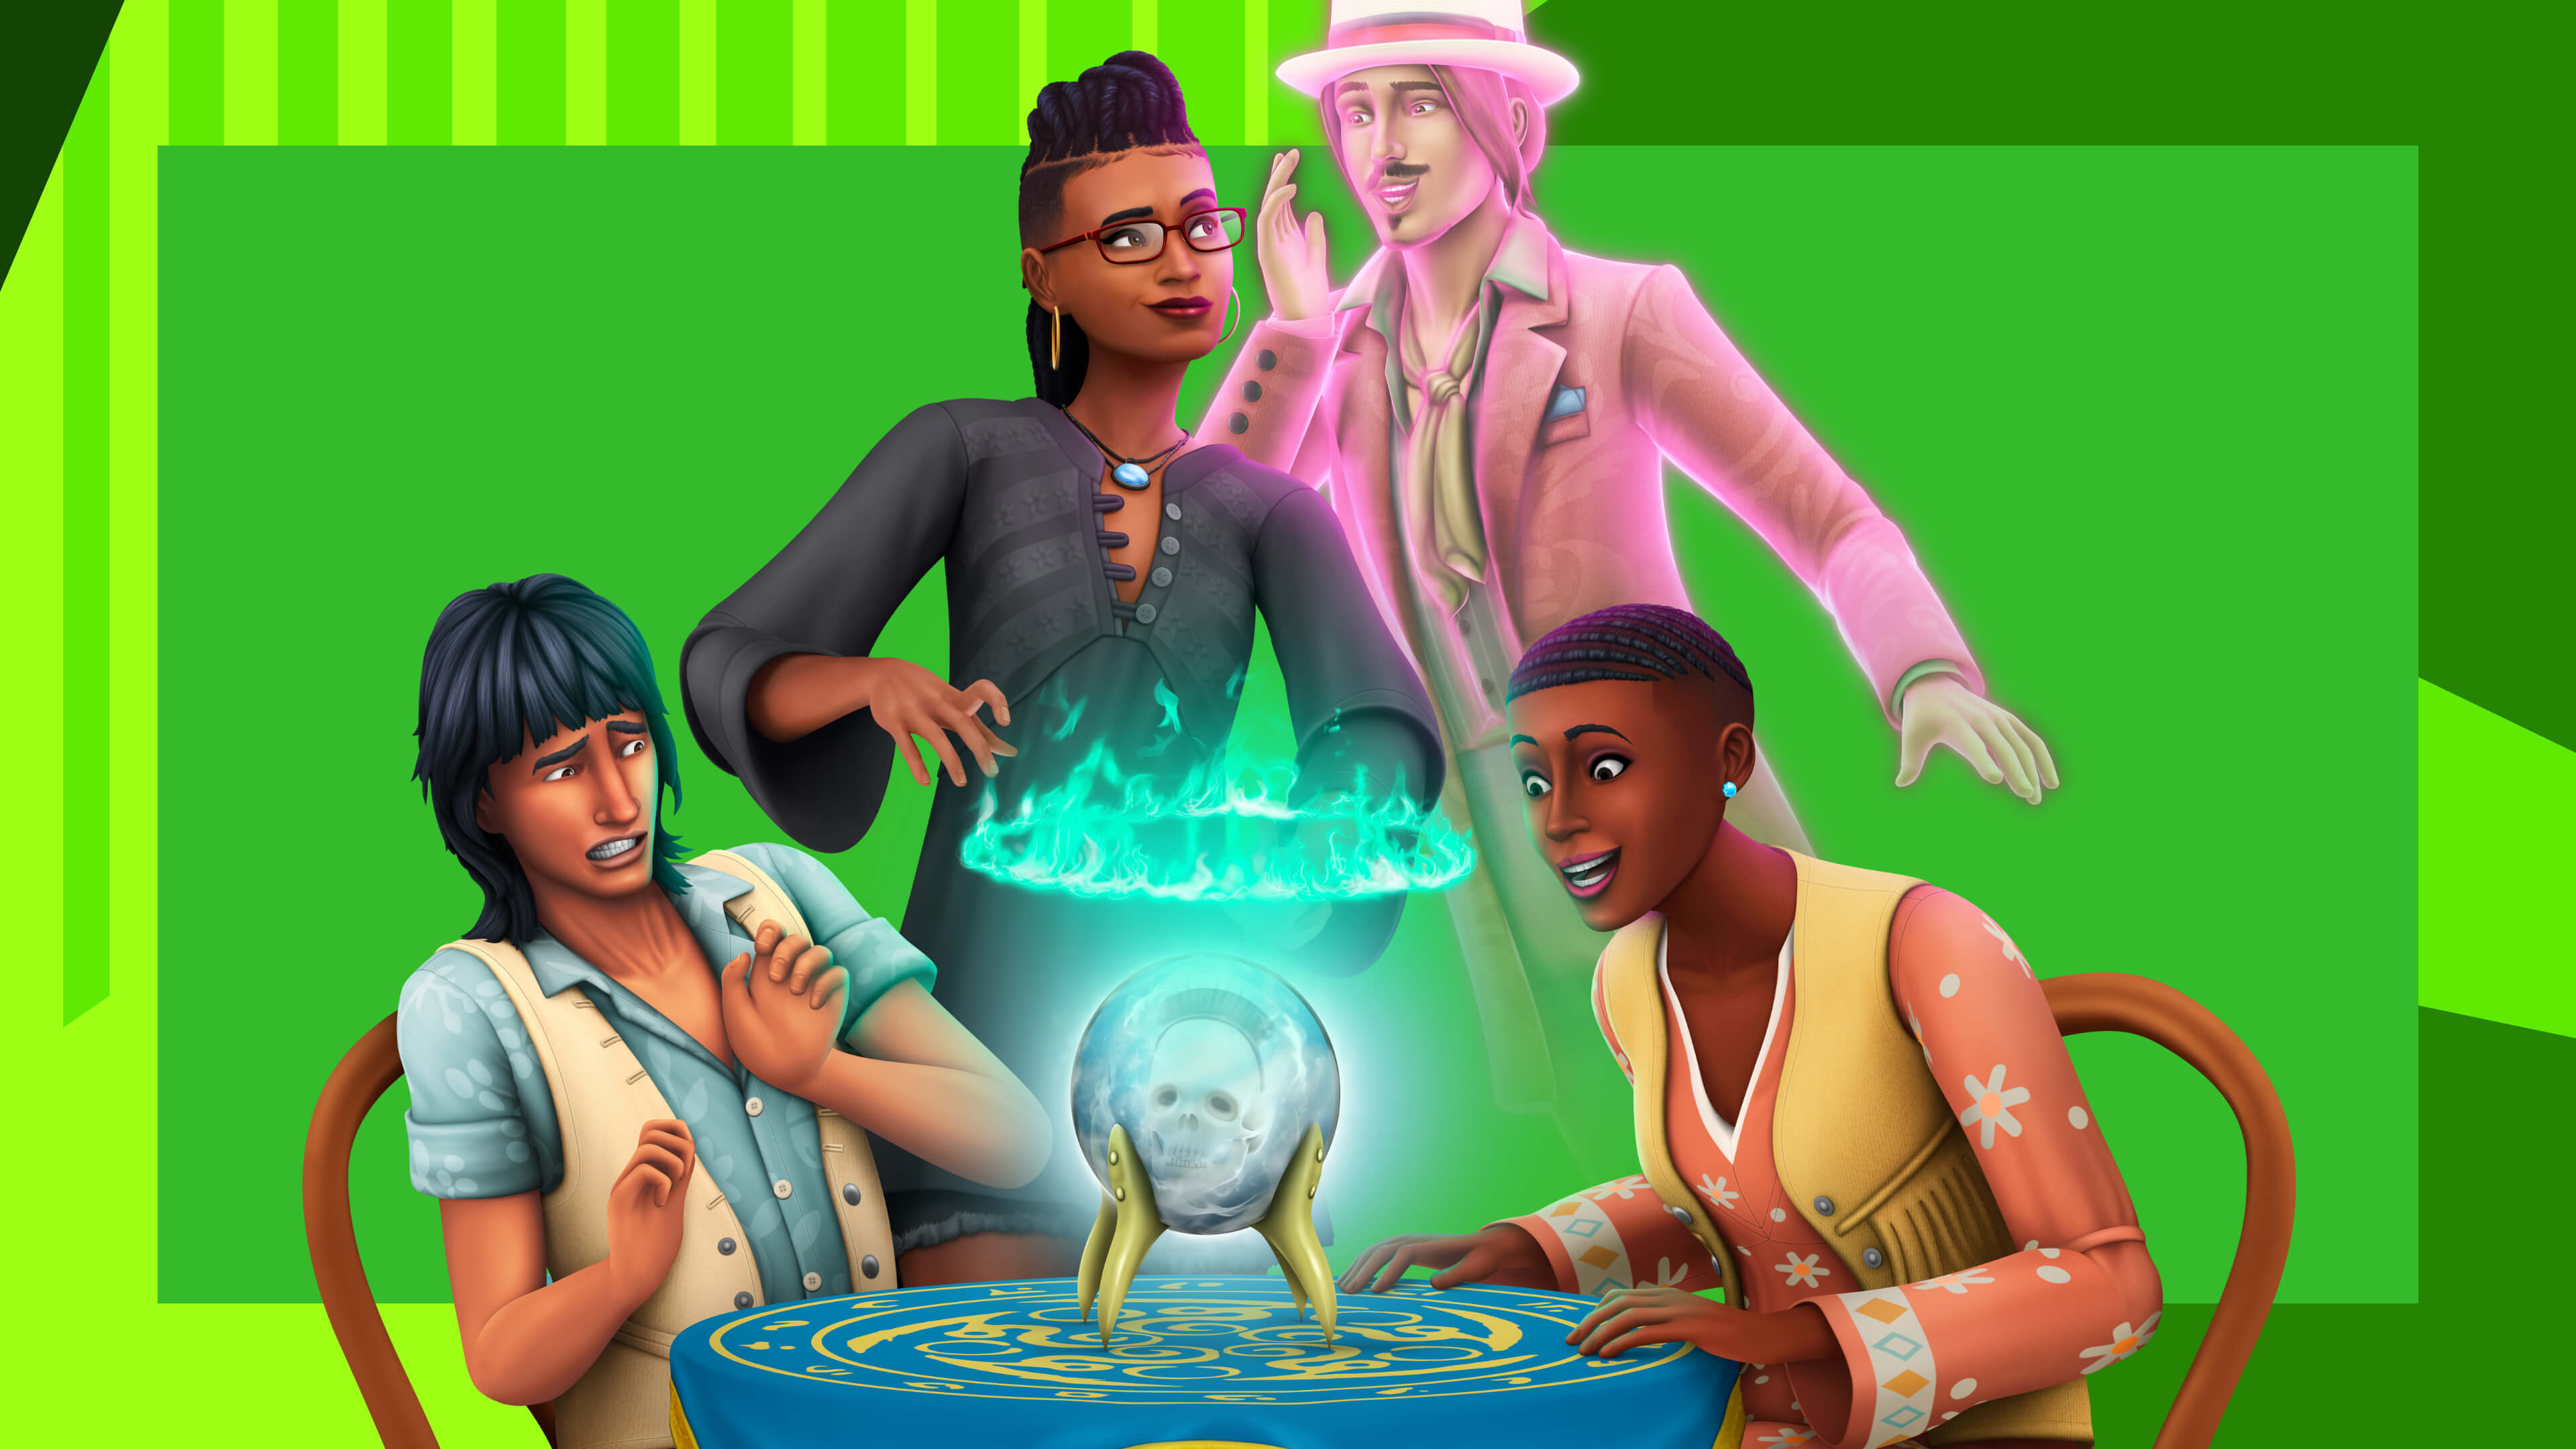 xin the sims 4 spooky stuff packs